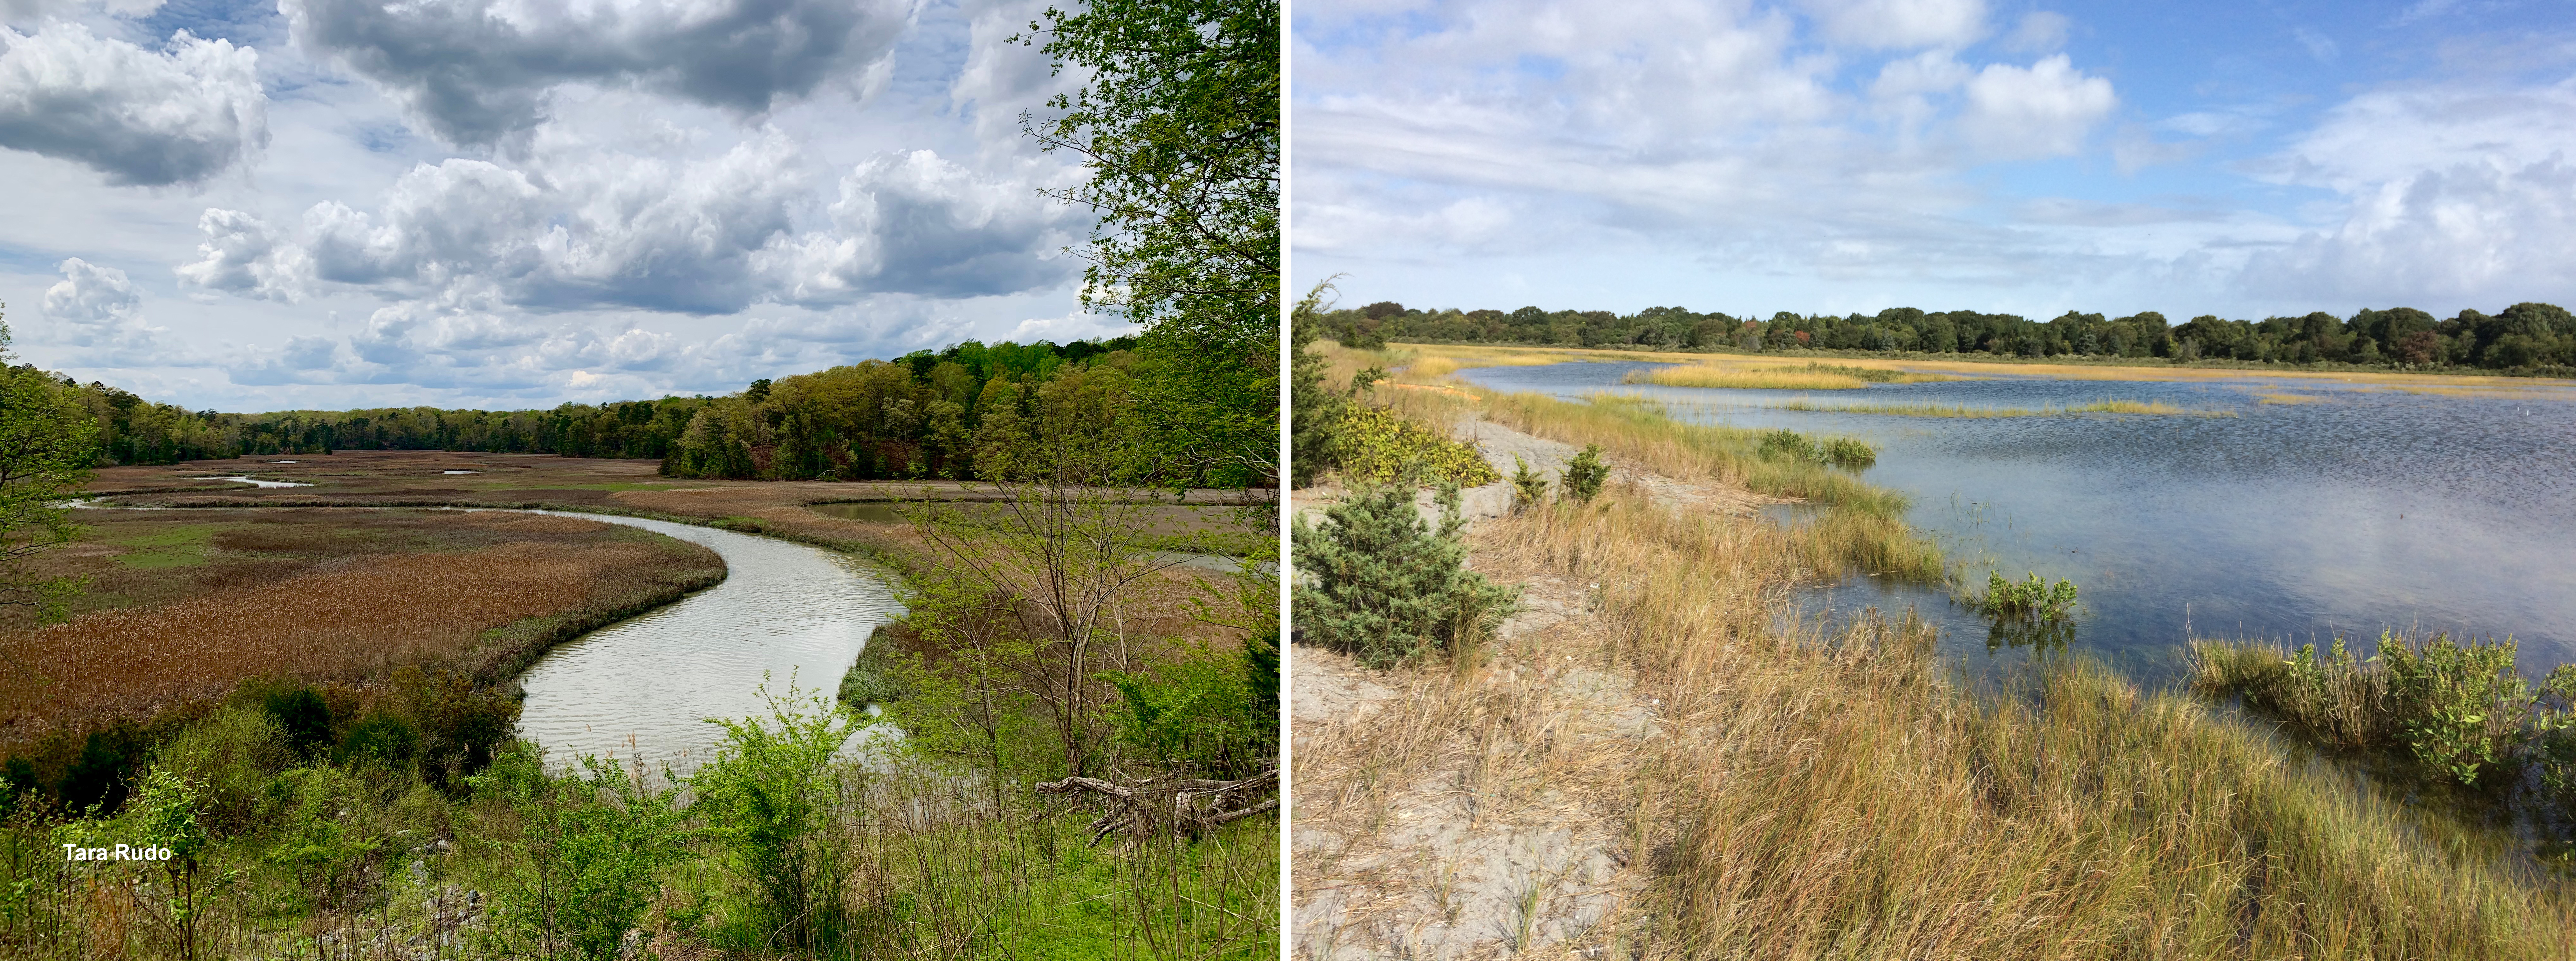 Comparison of unfragmented Southeast marshes (left) and developed marsh areas (right)